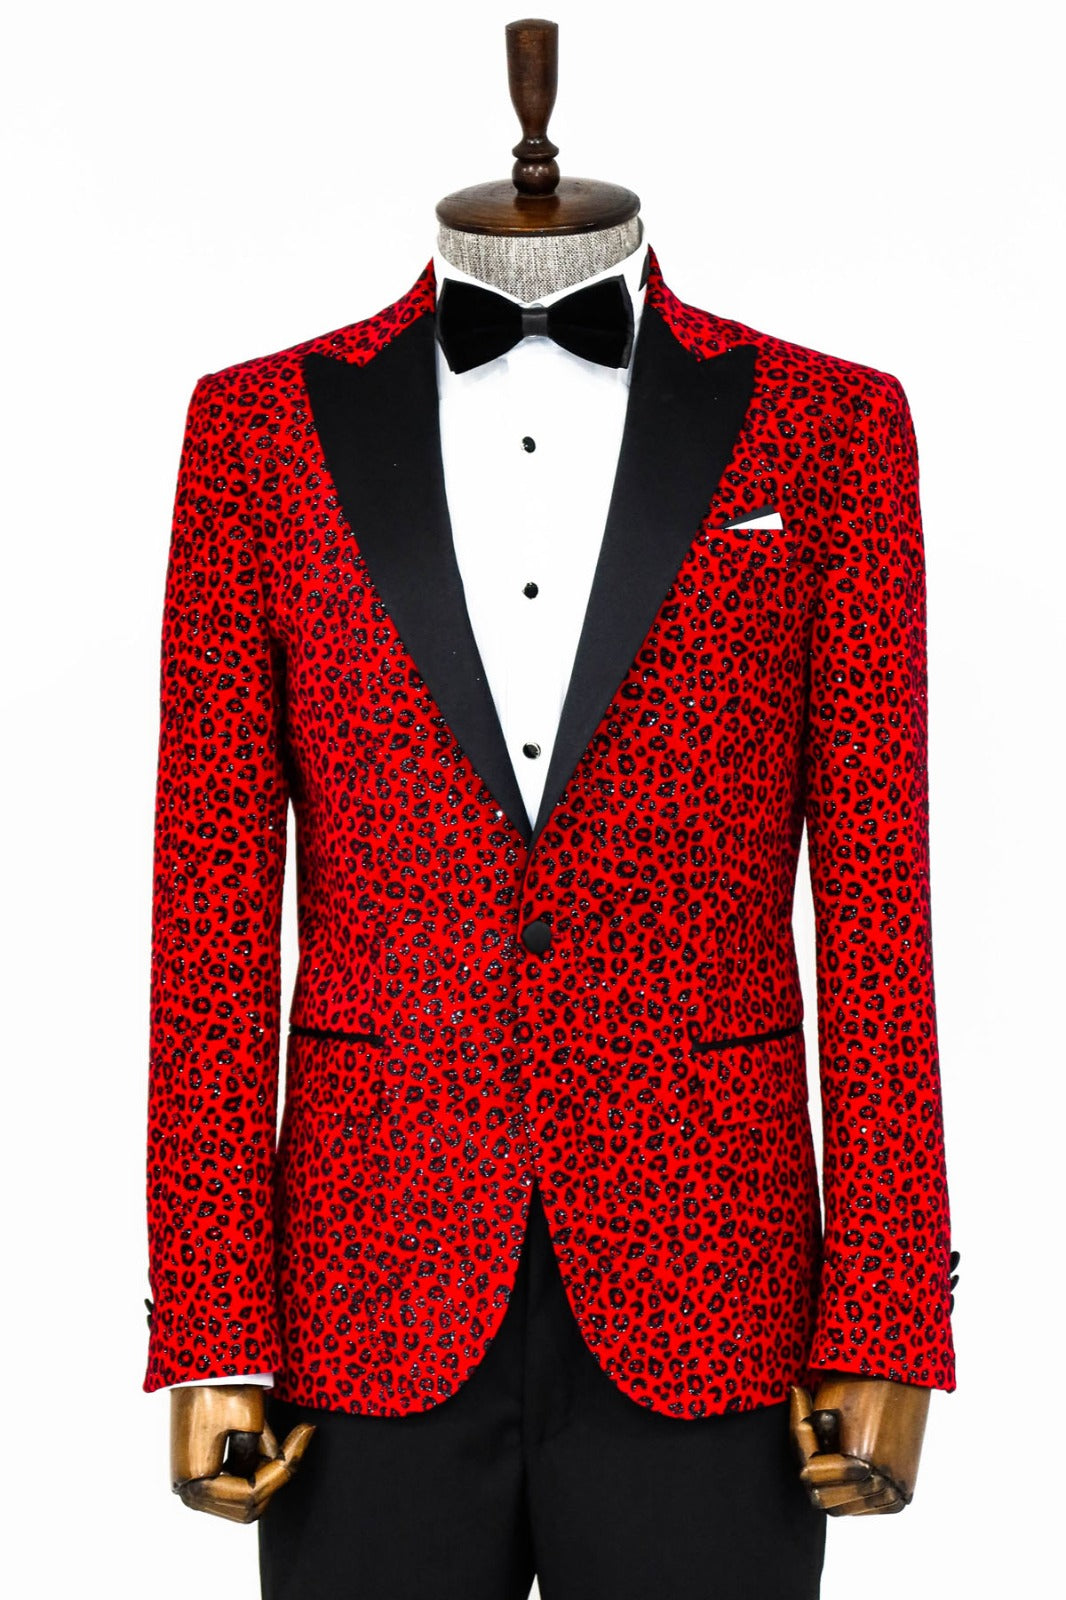 CT Menswear's Red Sparkle with Black Cheetah Design Prom Blazer, showcasing a bold and unforgettable choice for any formal event.